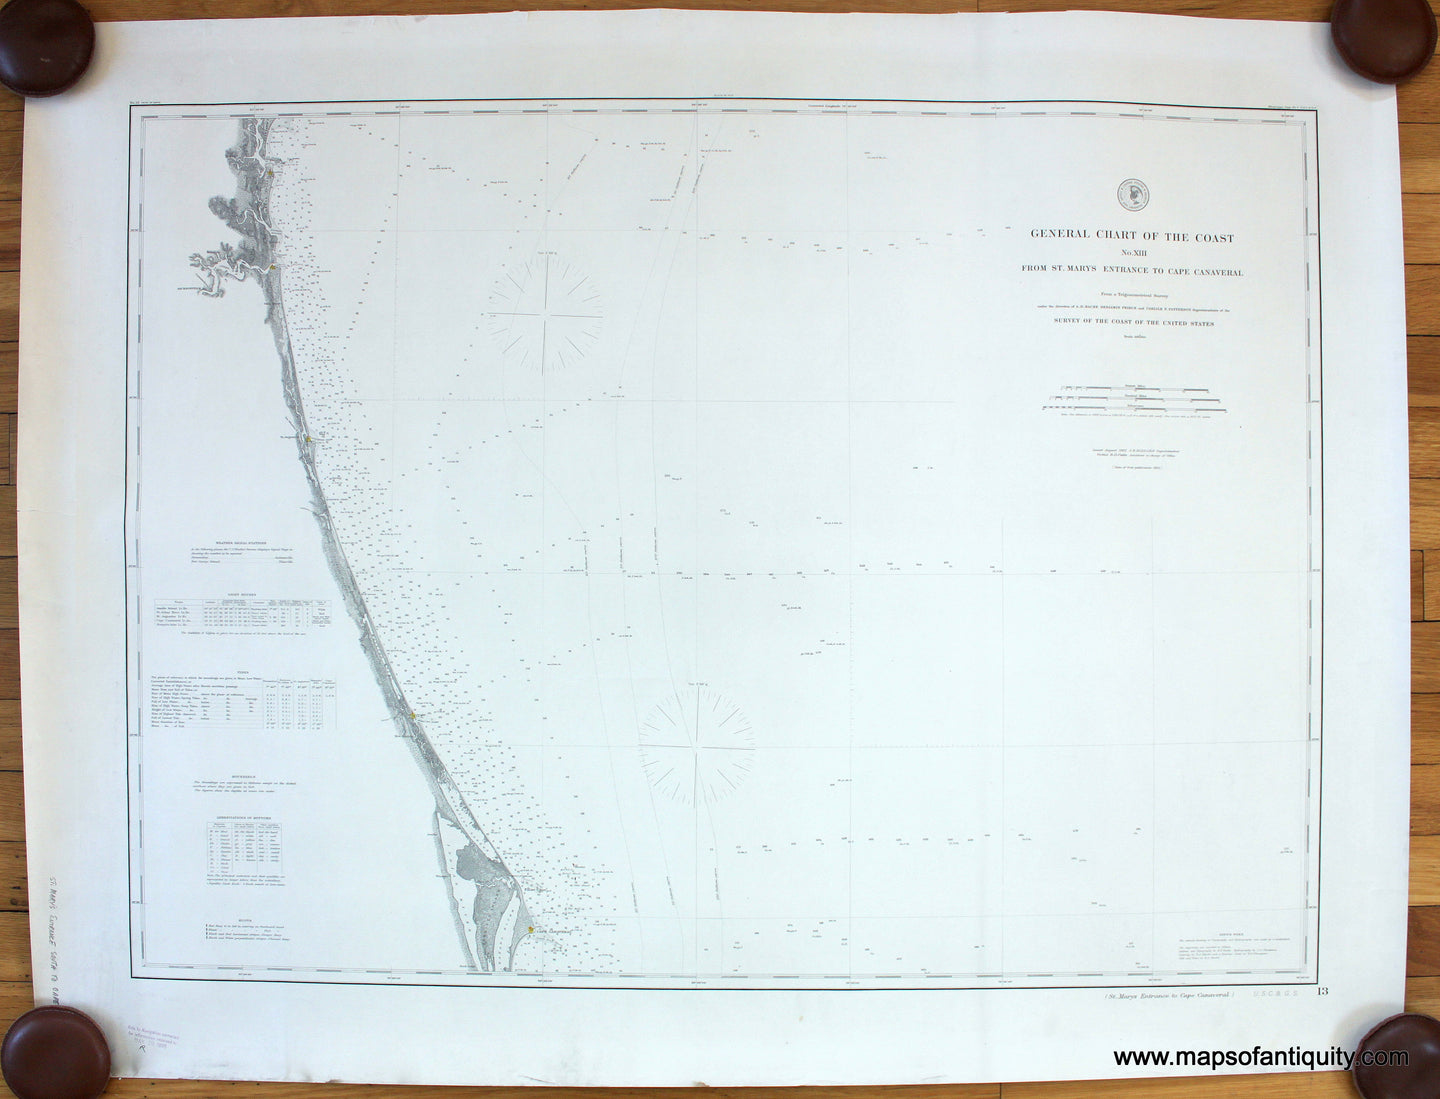 Antique-nautical-chart-map-General-Chart-of-the-Coast-No.-XIII-from-St.-Mary's-Entrance-to-Cape-Canaveral-Florida-USC&GS-1882-1898-St-Augustine-Amelia-Island-Daytona-Beach-1800s-19th-century-Maps-of-Antiquity